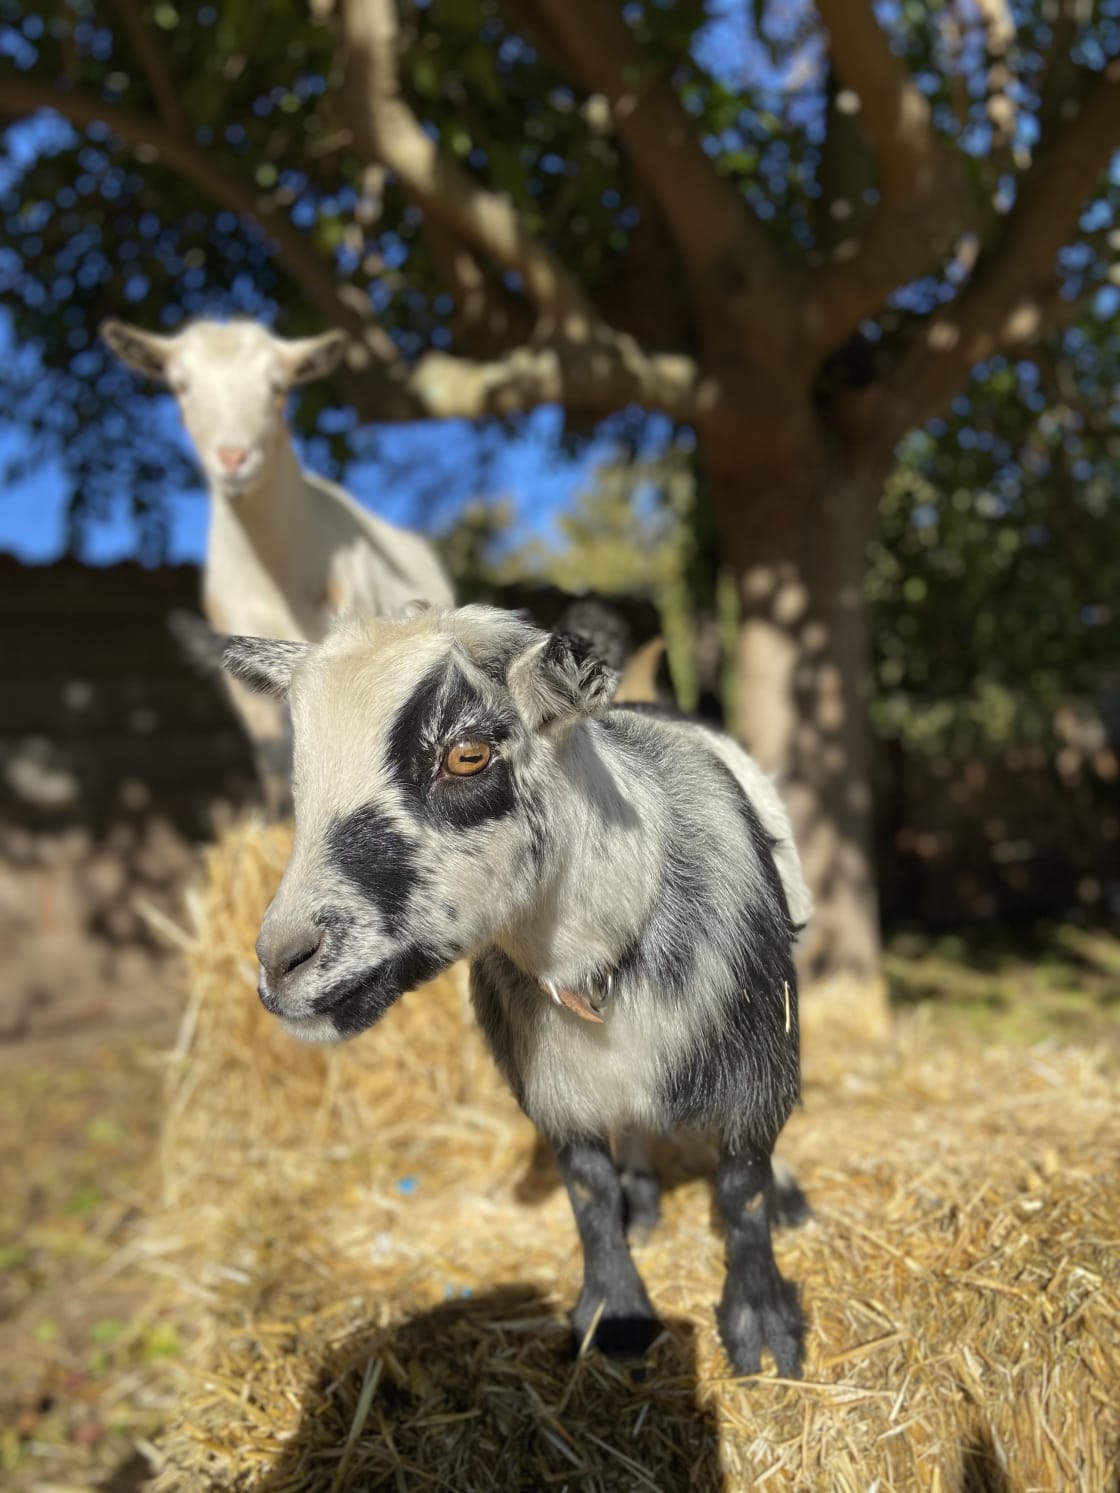 Pigmy goats can be fed and interacted with...